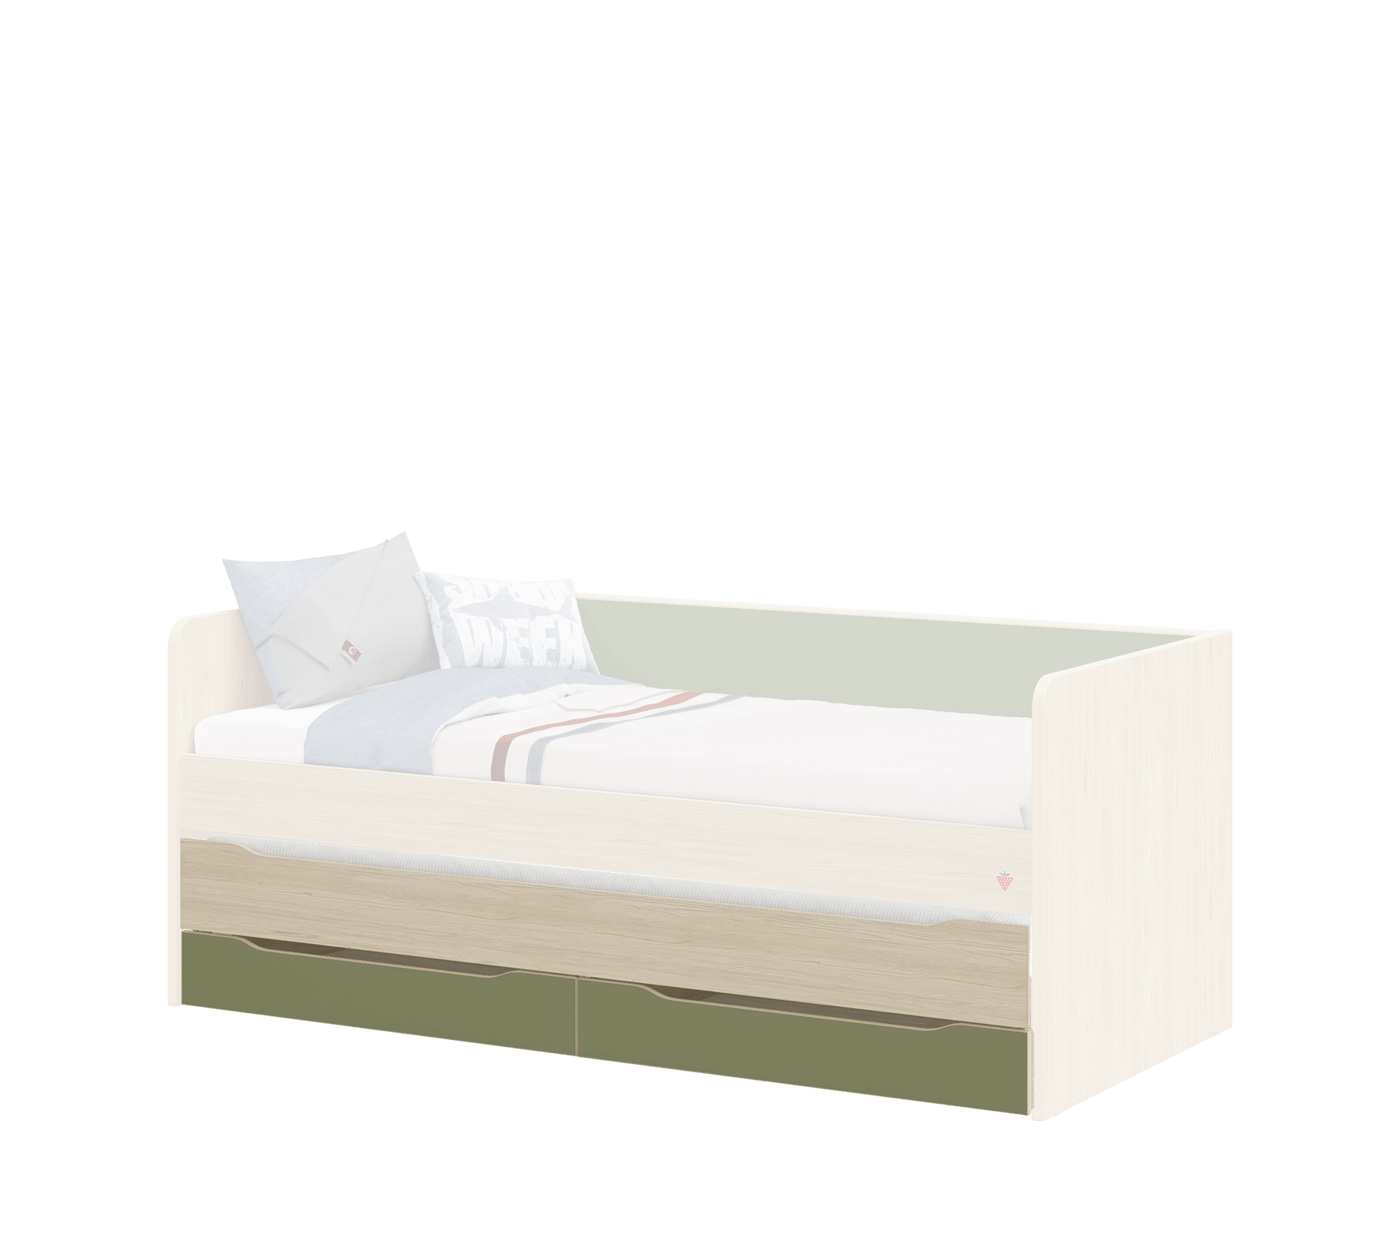 Studio Drawer Pull-out Bed Natural